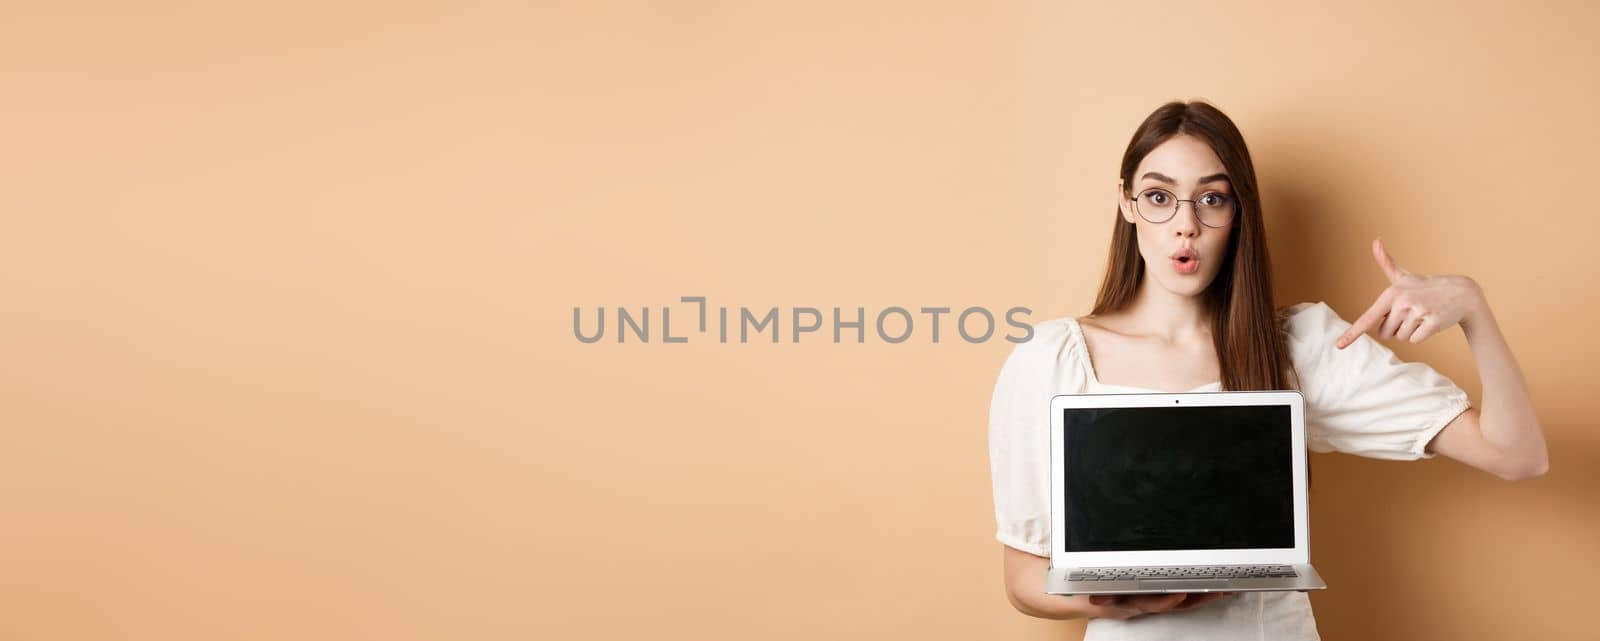 Excited girl in glasses making presentation on computer, pointing hand at laptop screen and say wow, standing on beige background.